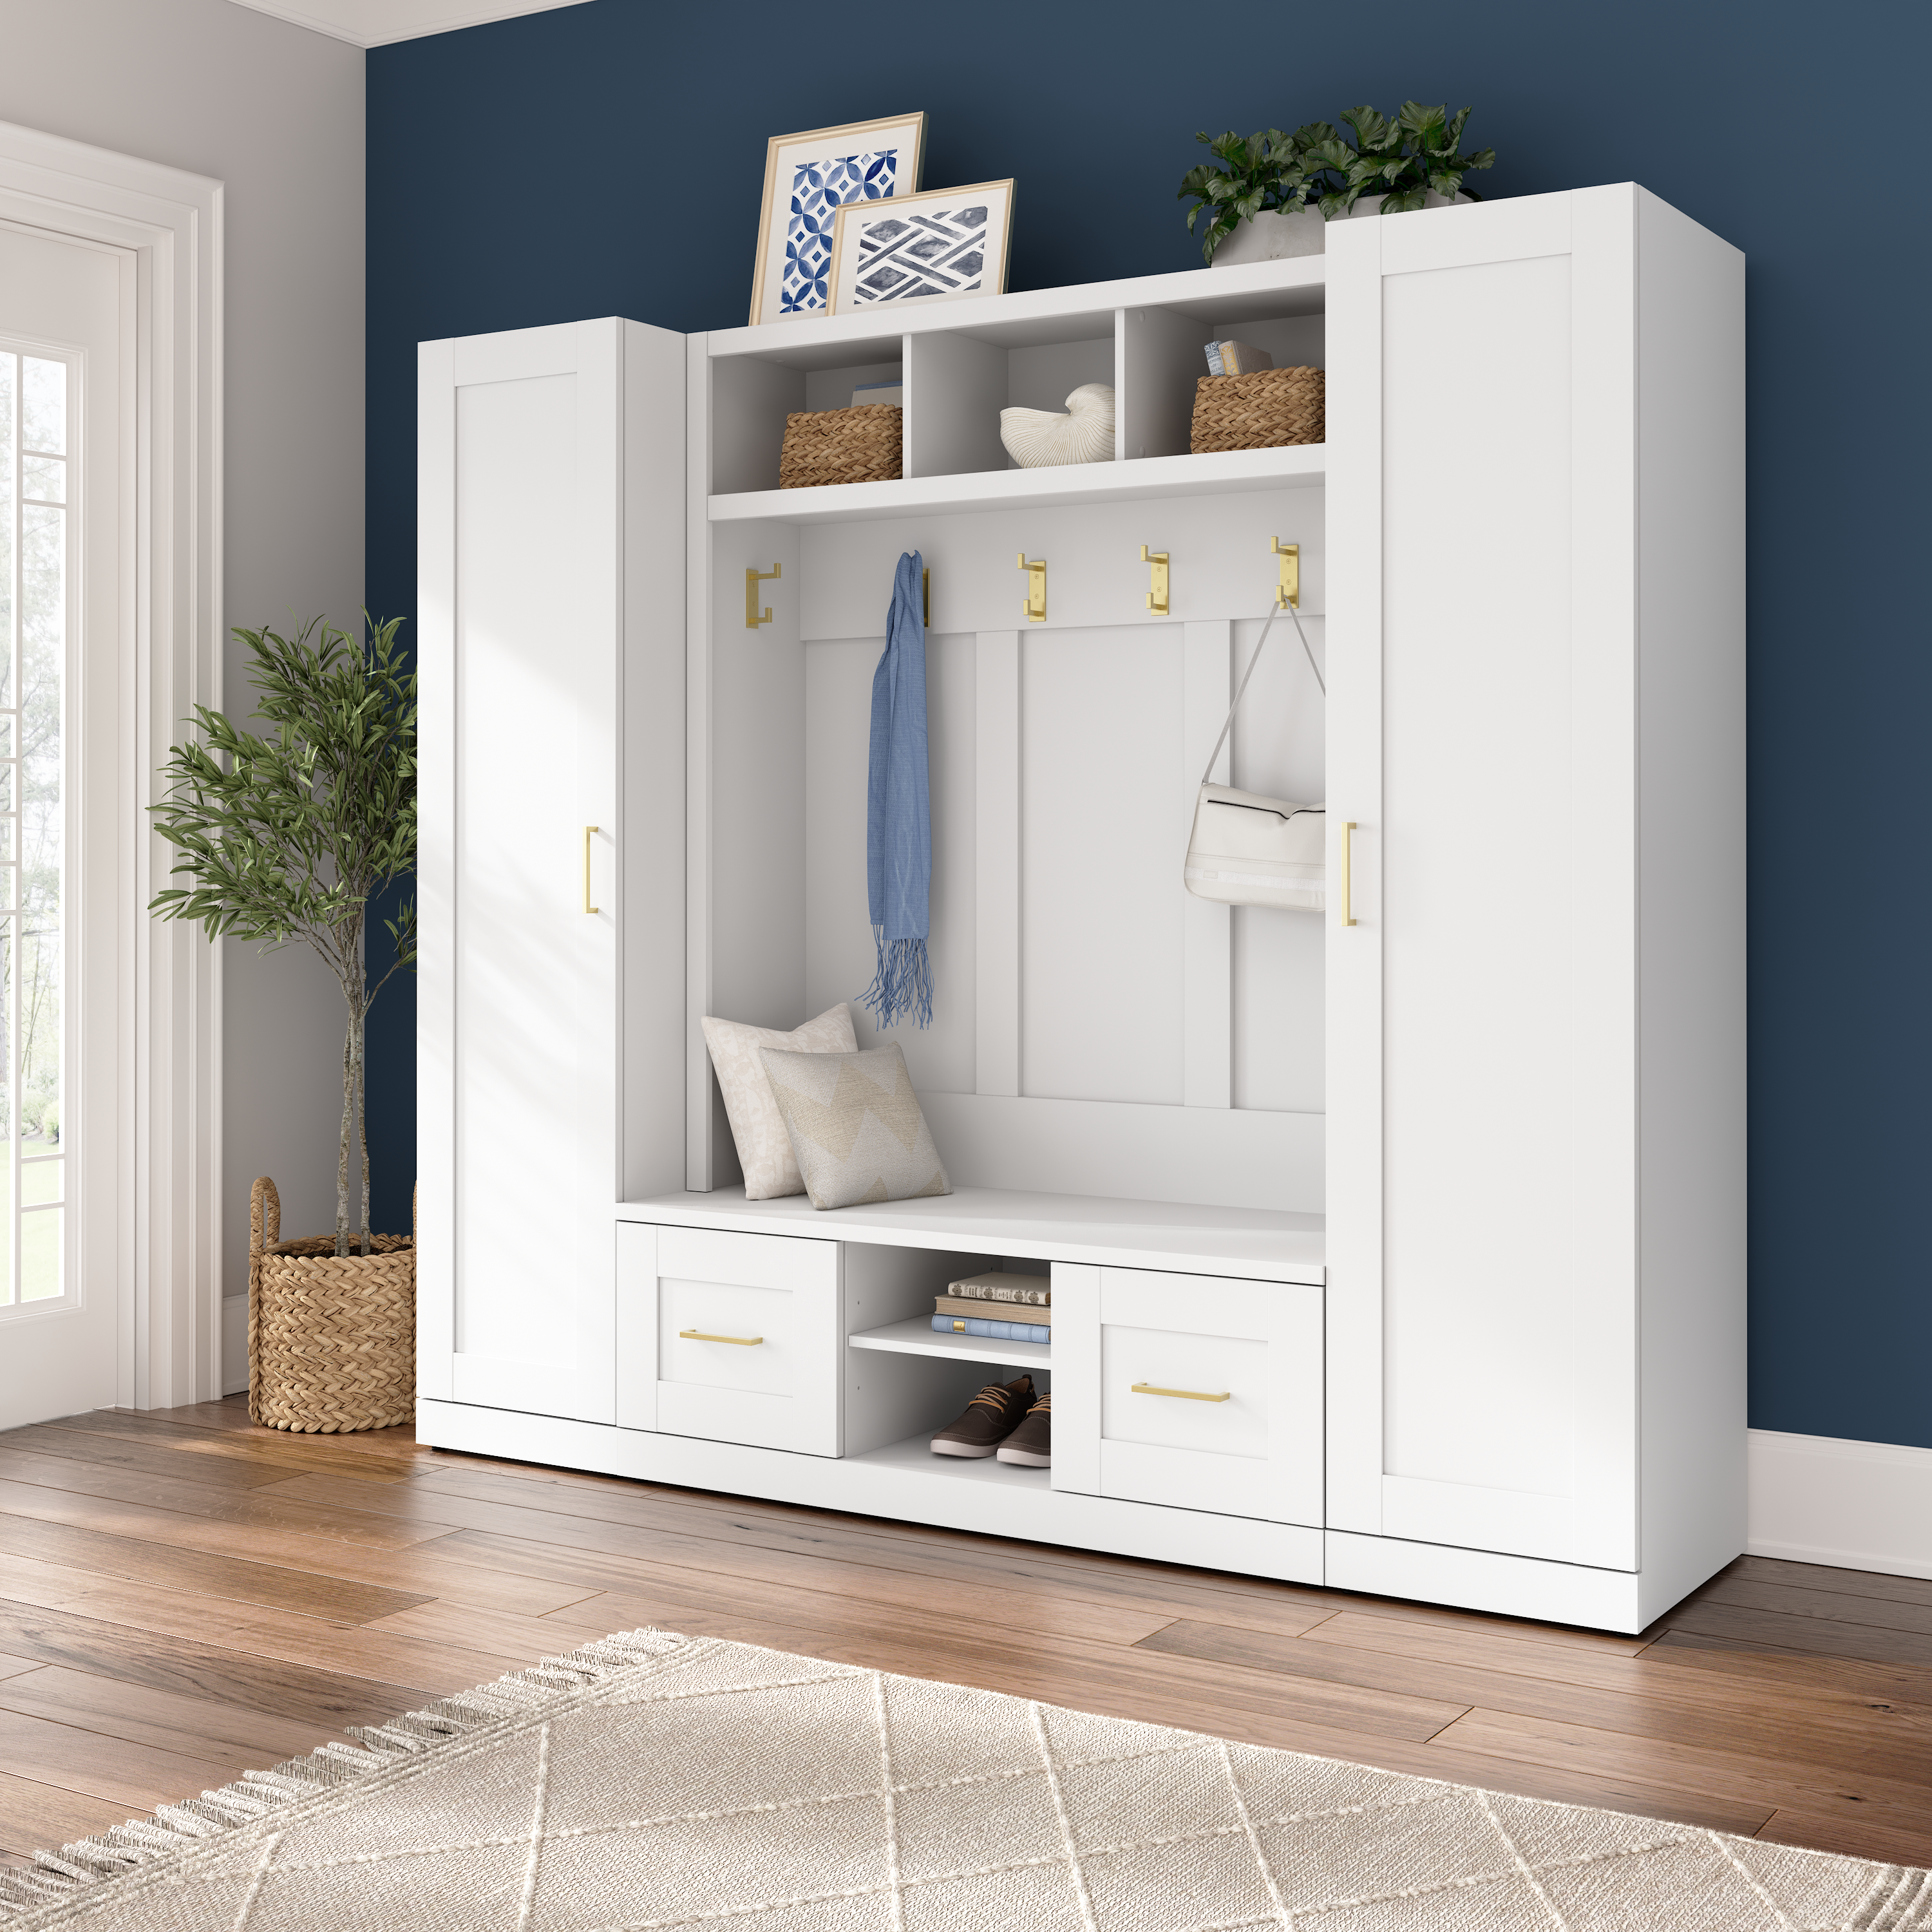 Shop Bush Furniture Hampton Heights Full Entryway Storage Set with Hall Tree, Shoe Bench with Doors and Narrow Cabinets 01 HHS015WH #color_white